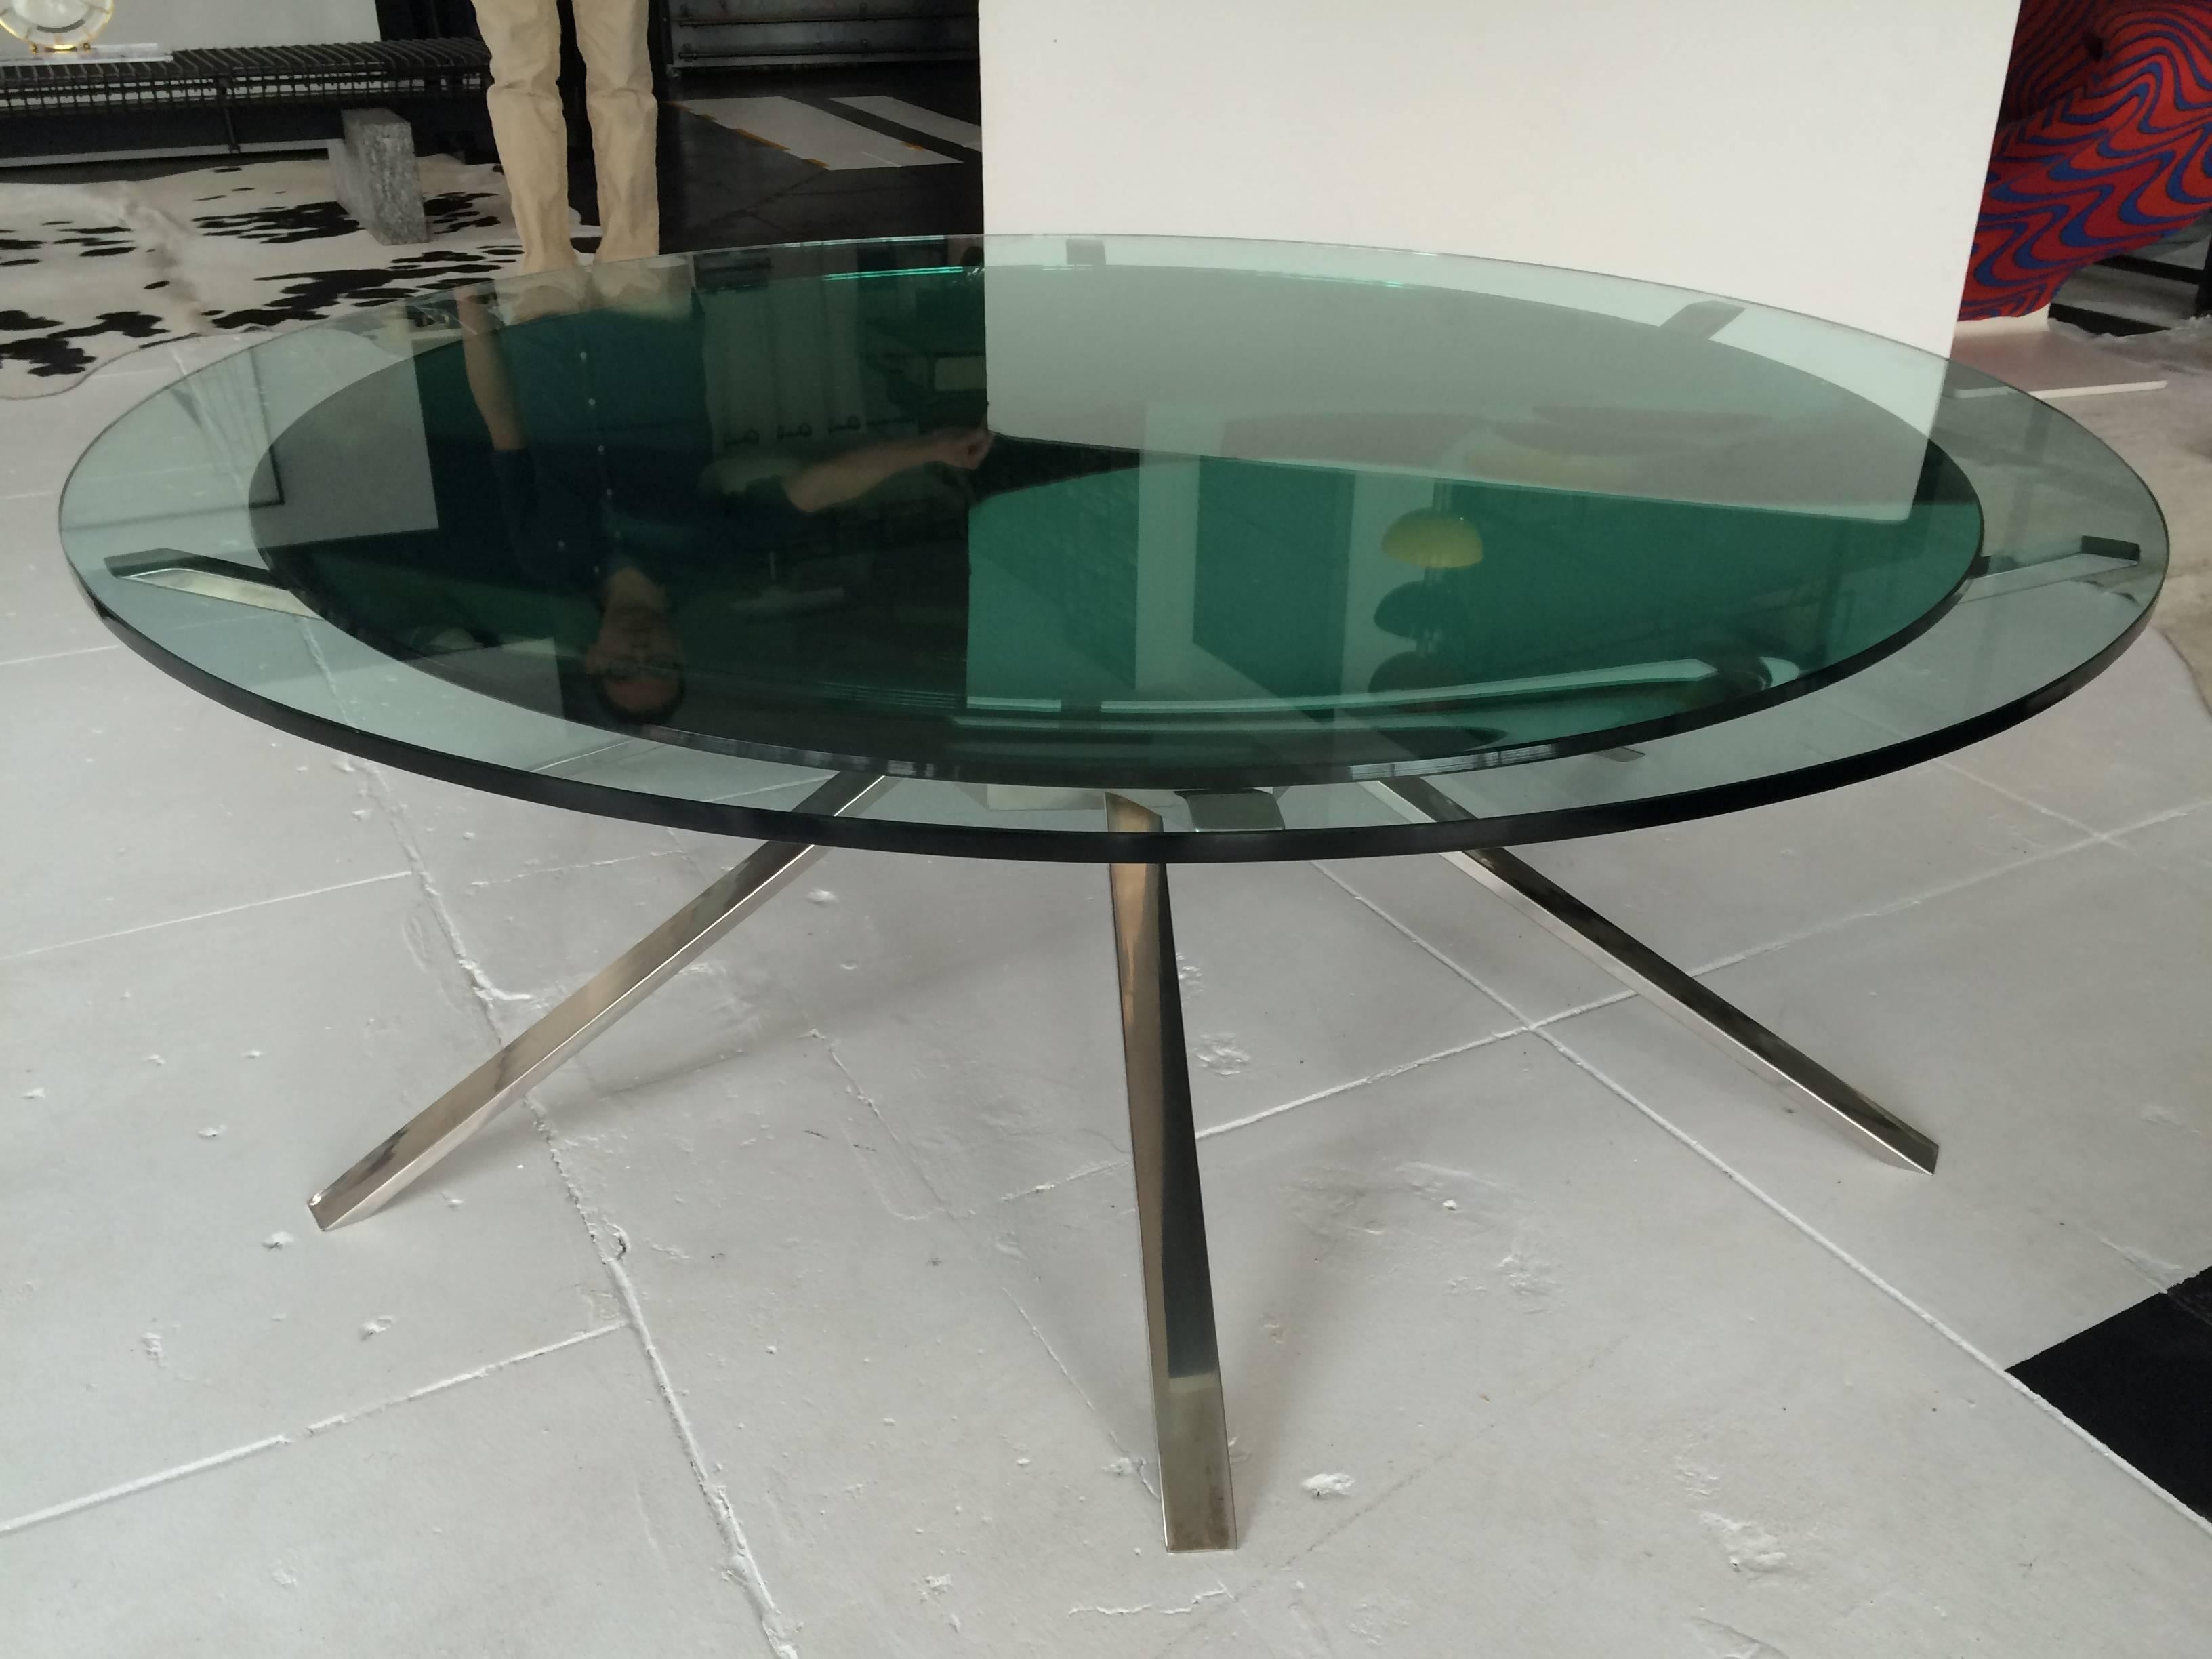 Very unique Italian coffee table with two glass-tops. Measures: First is green 1/2 inch thick mirror, second glass is clear 1/2 inch thick, chrome metal base.